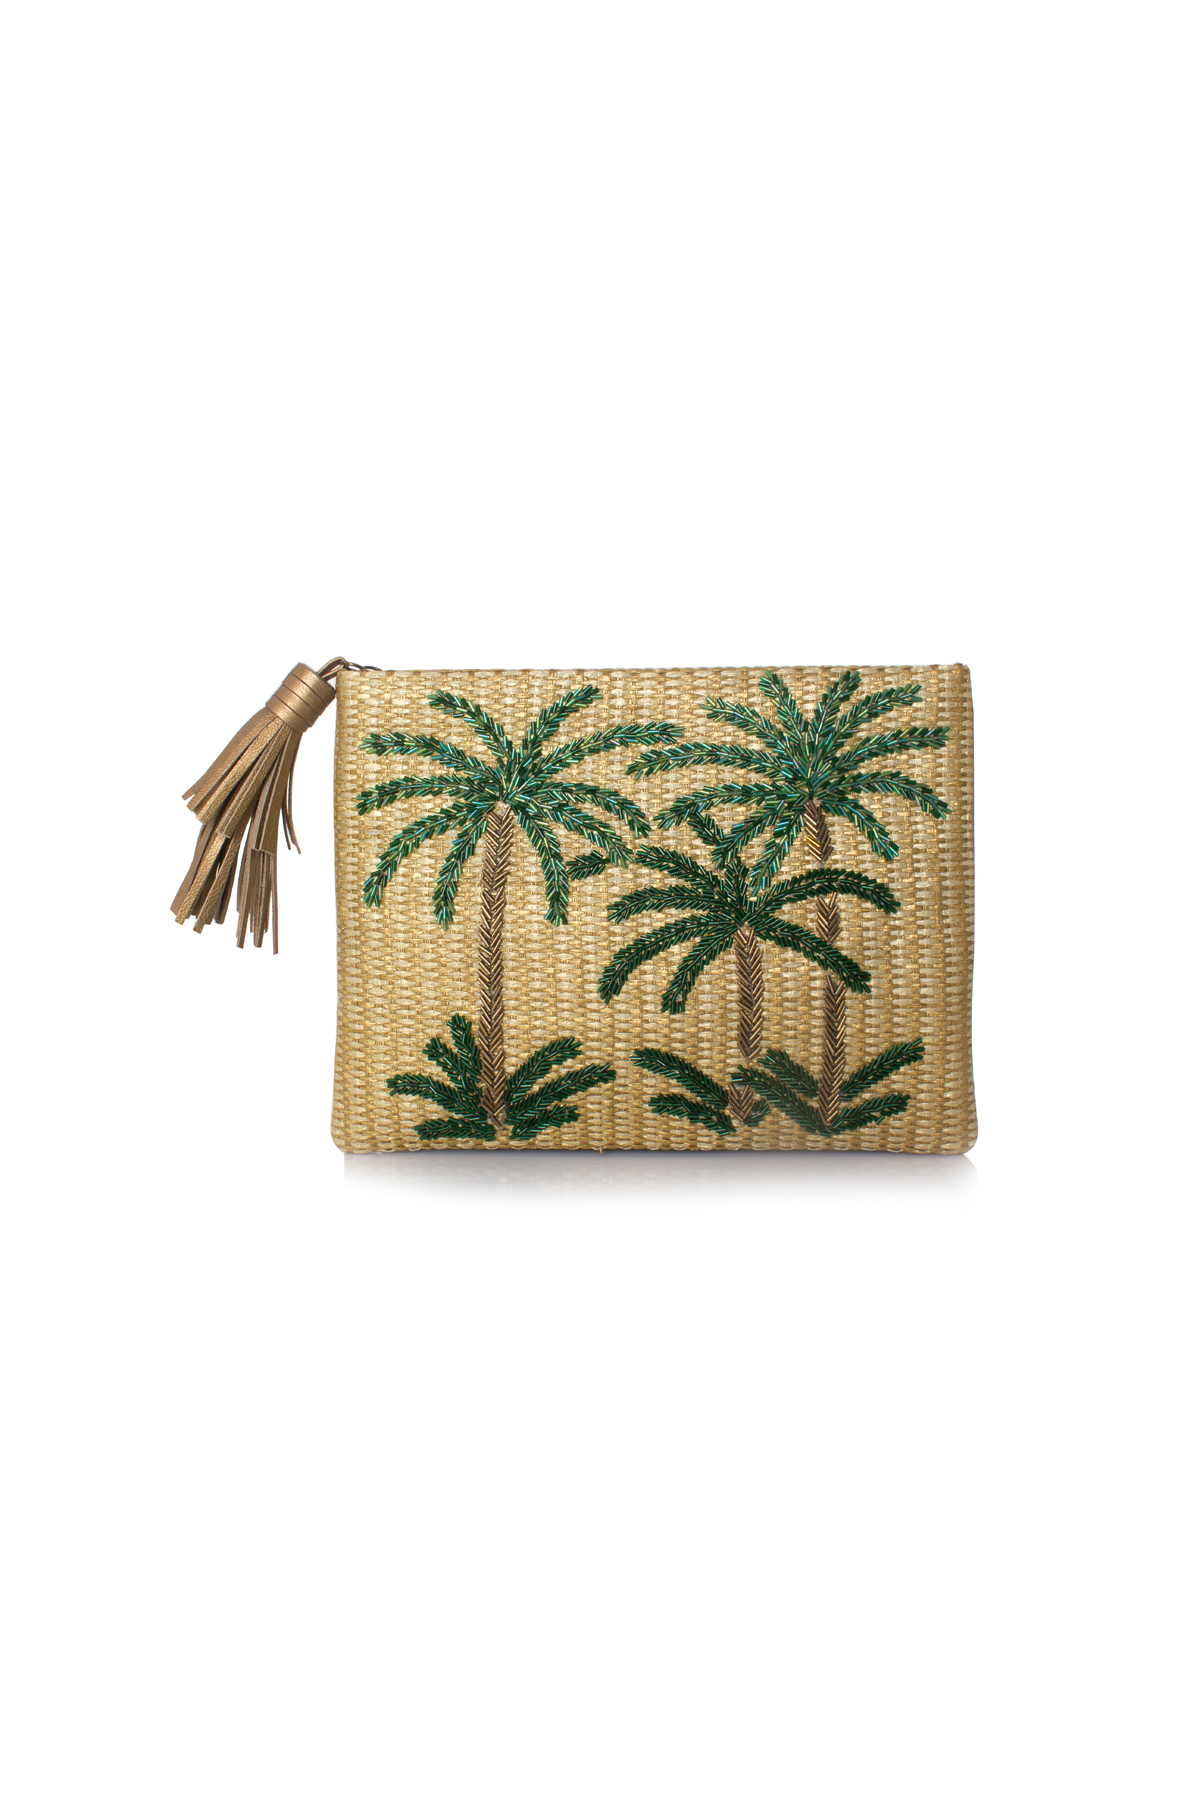 Oasis Pouch - Green Palms